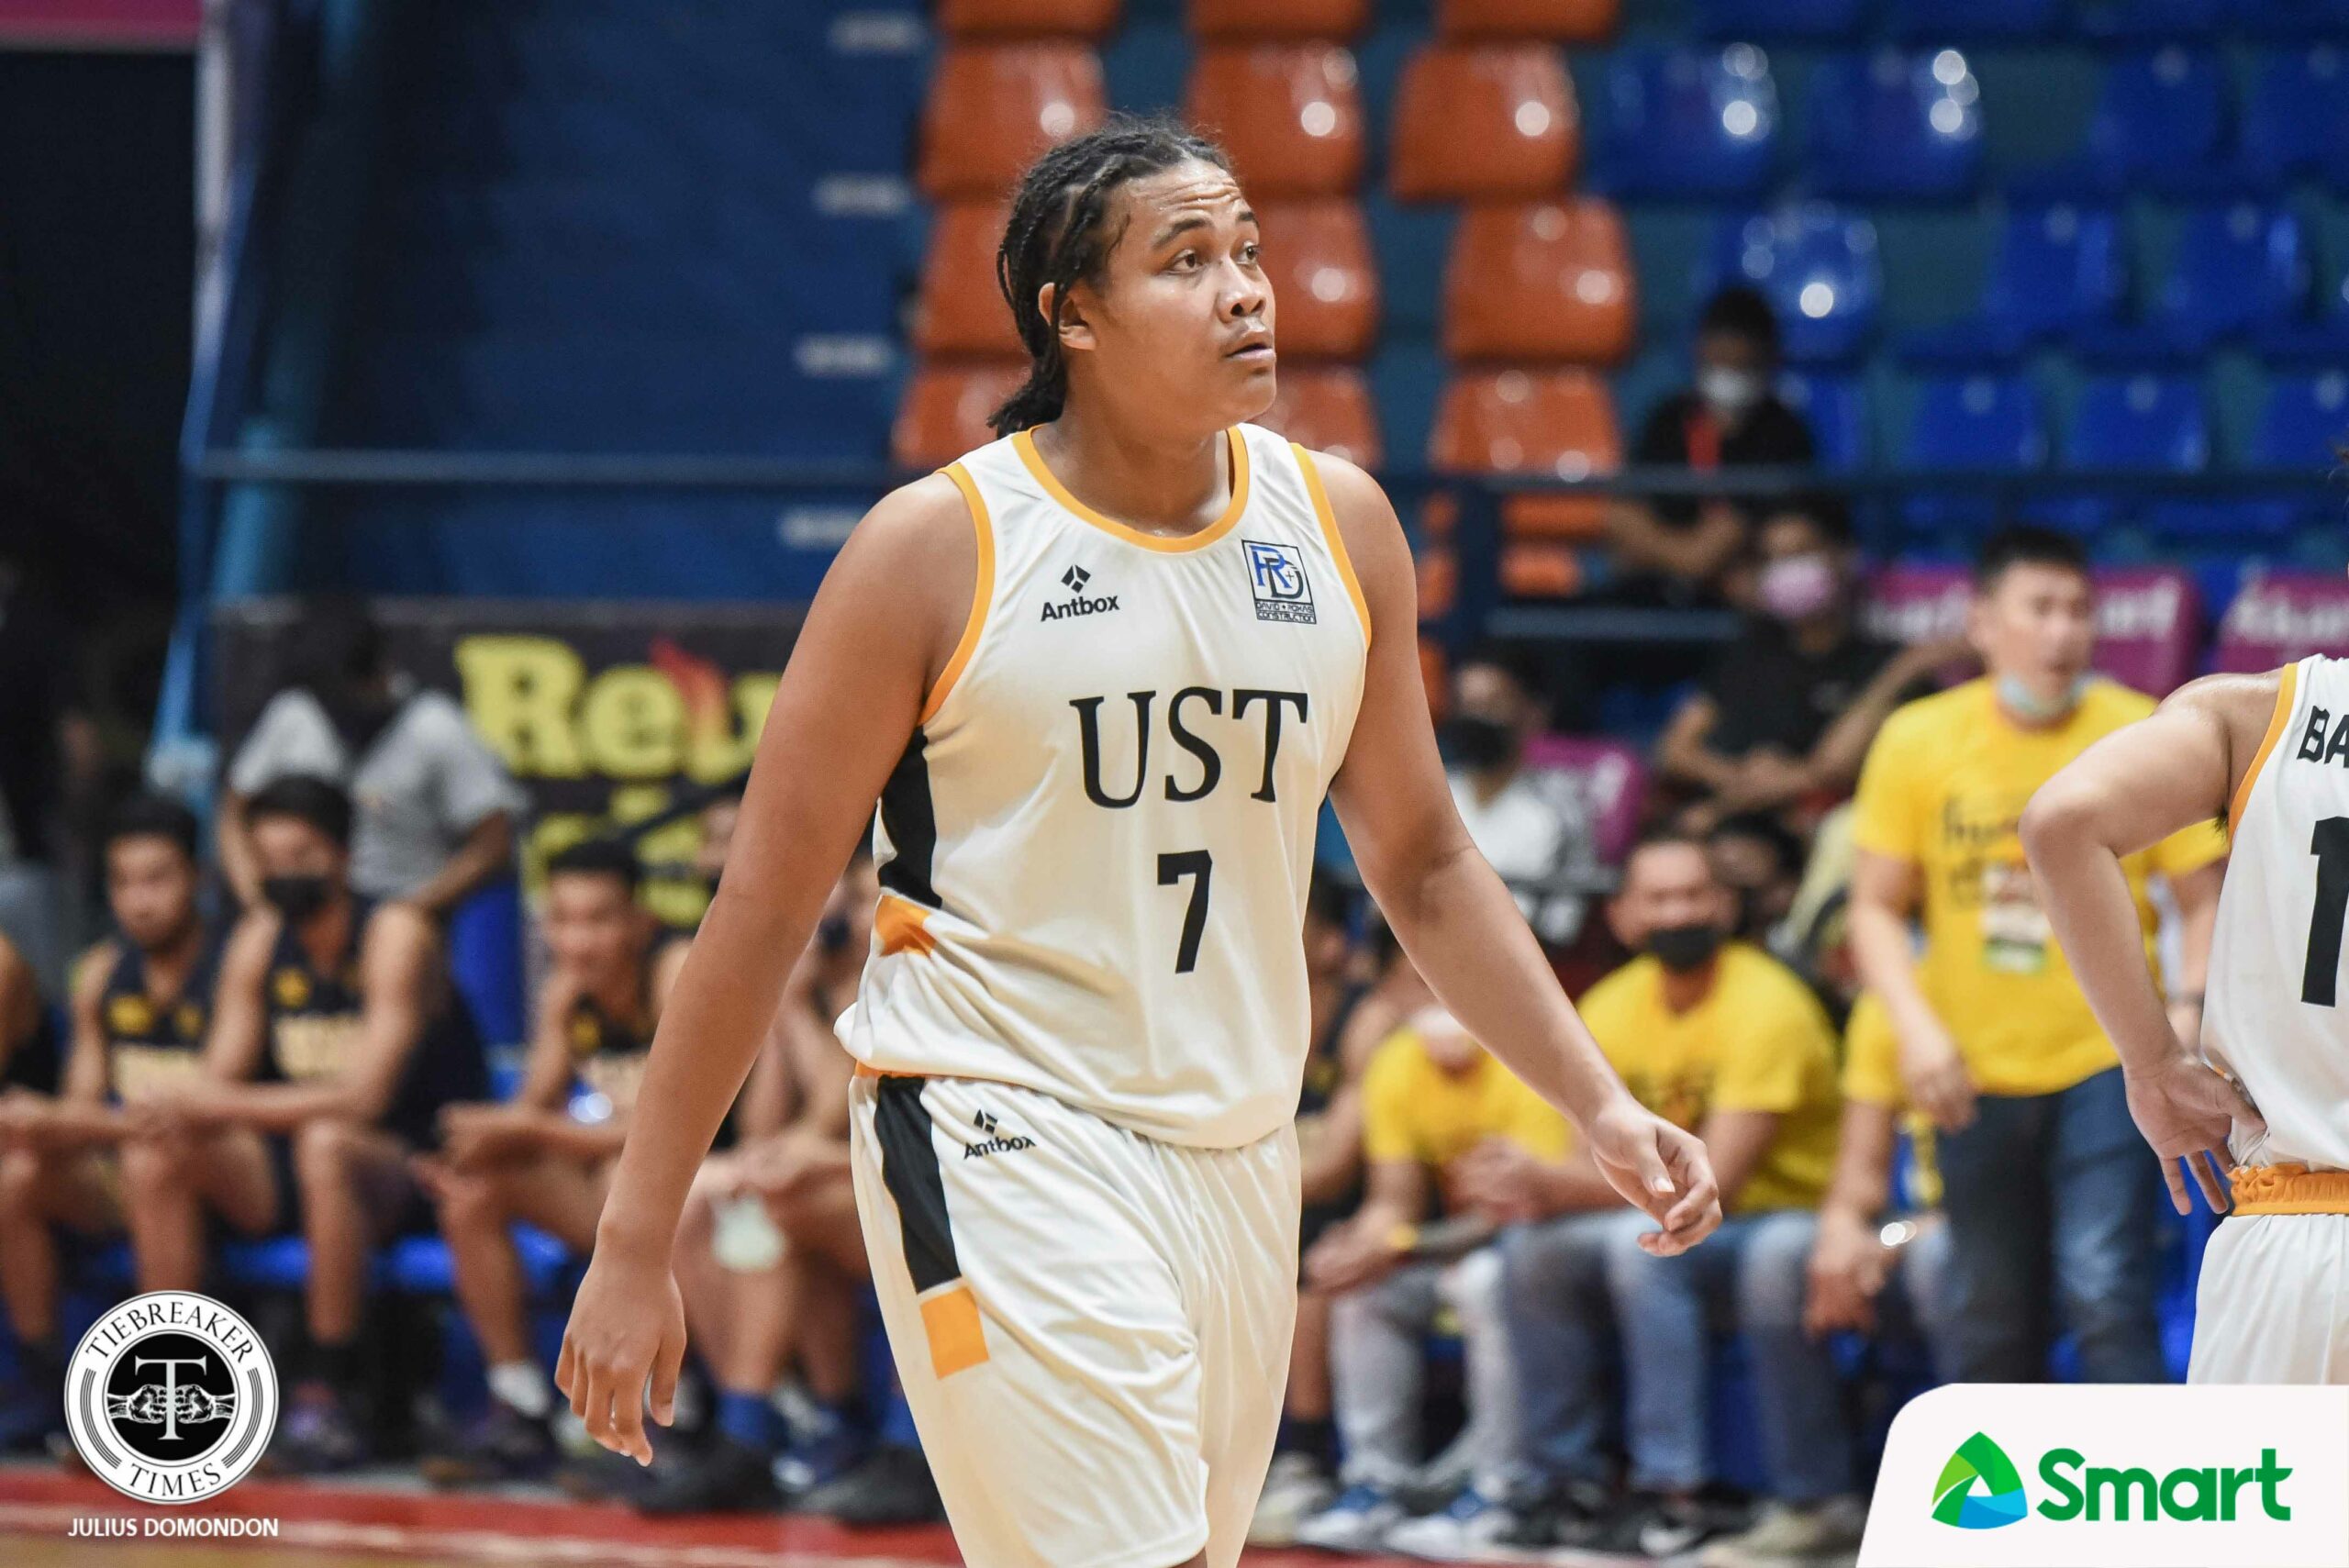 FOEO-MBB-UST-Gani-Stevens-1-scaled Gani Stevens' reps explain decision to move out of UST Basketball News UAAP UE UST  - philippine sports news